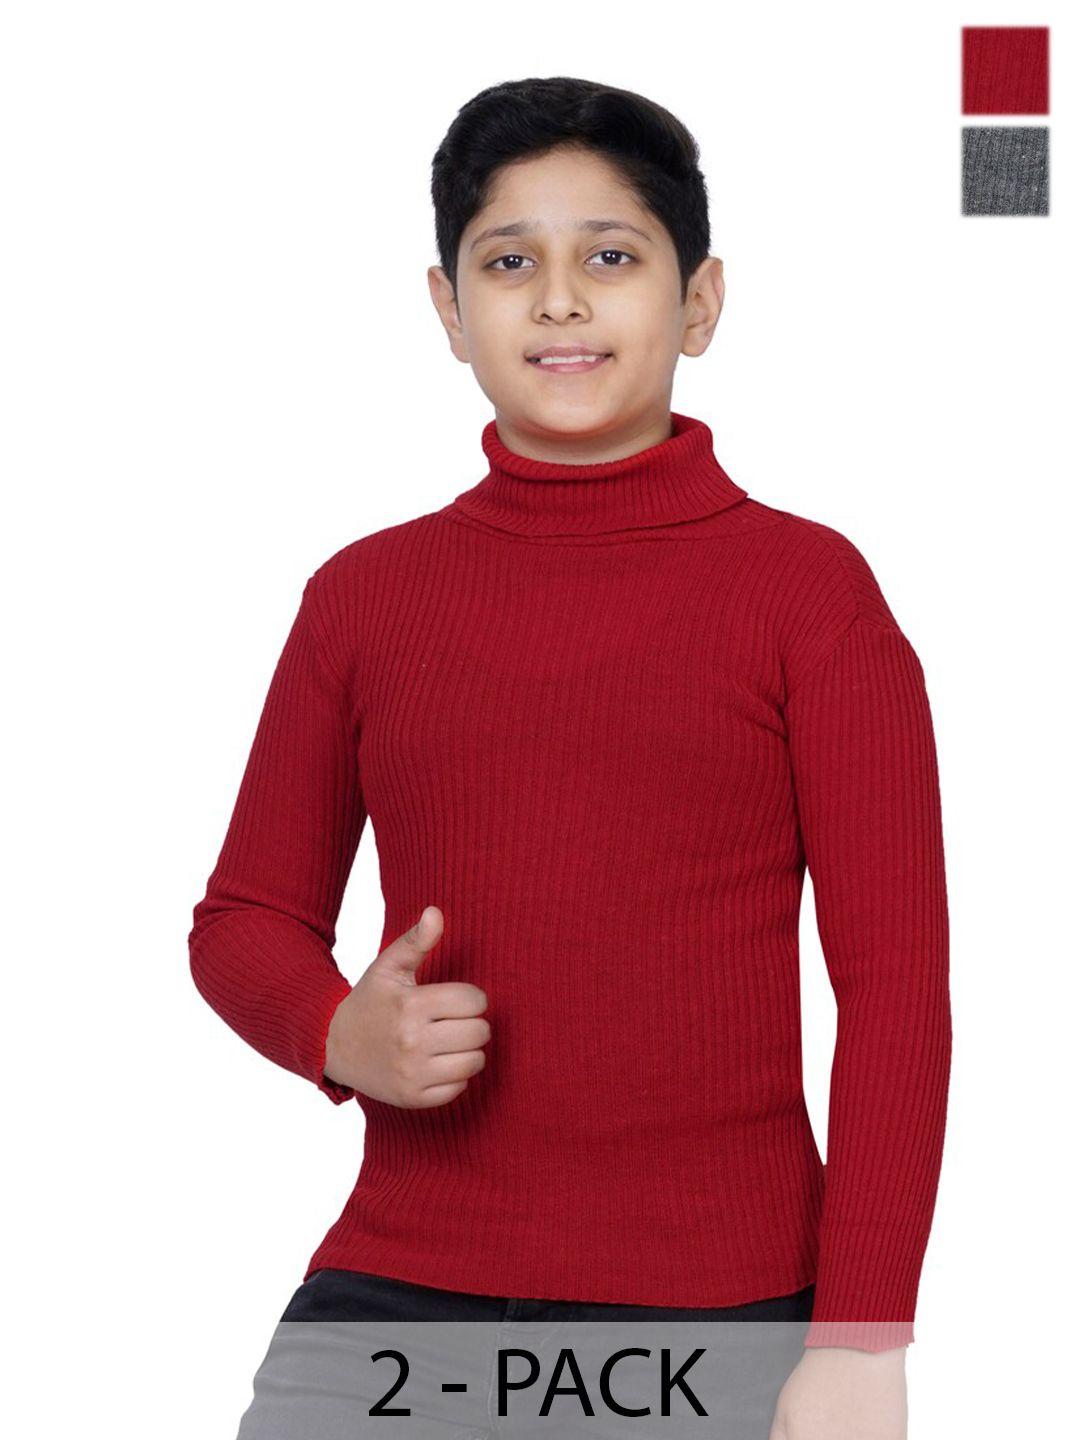 baesd-boys-woollen-pullover-with-applique-detail